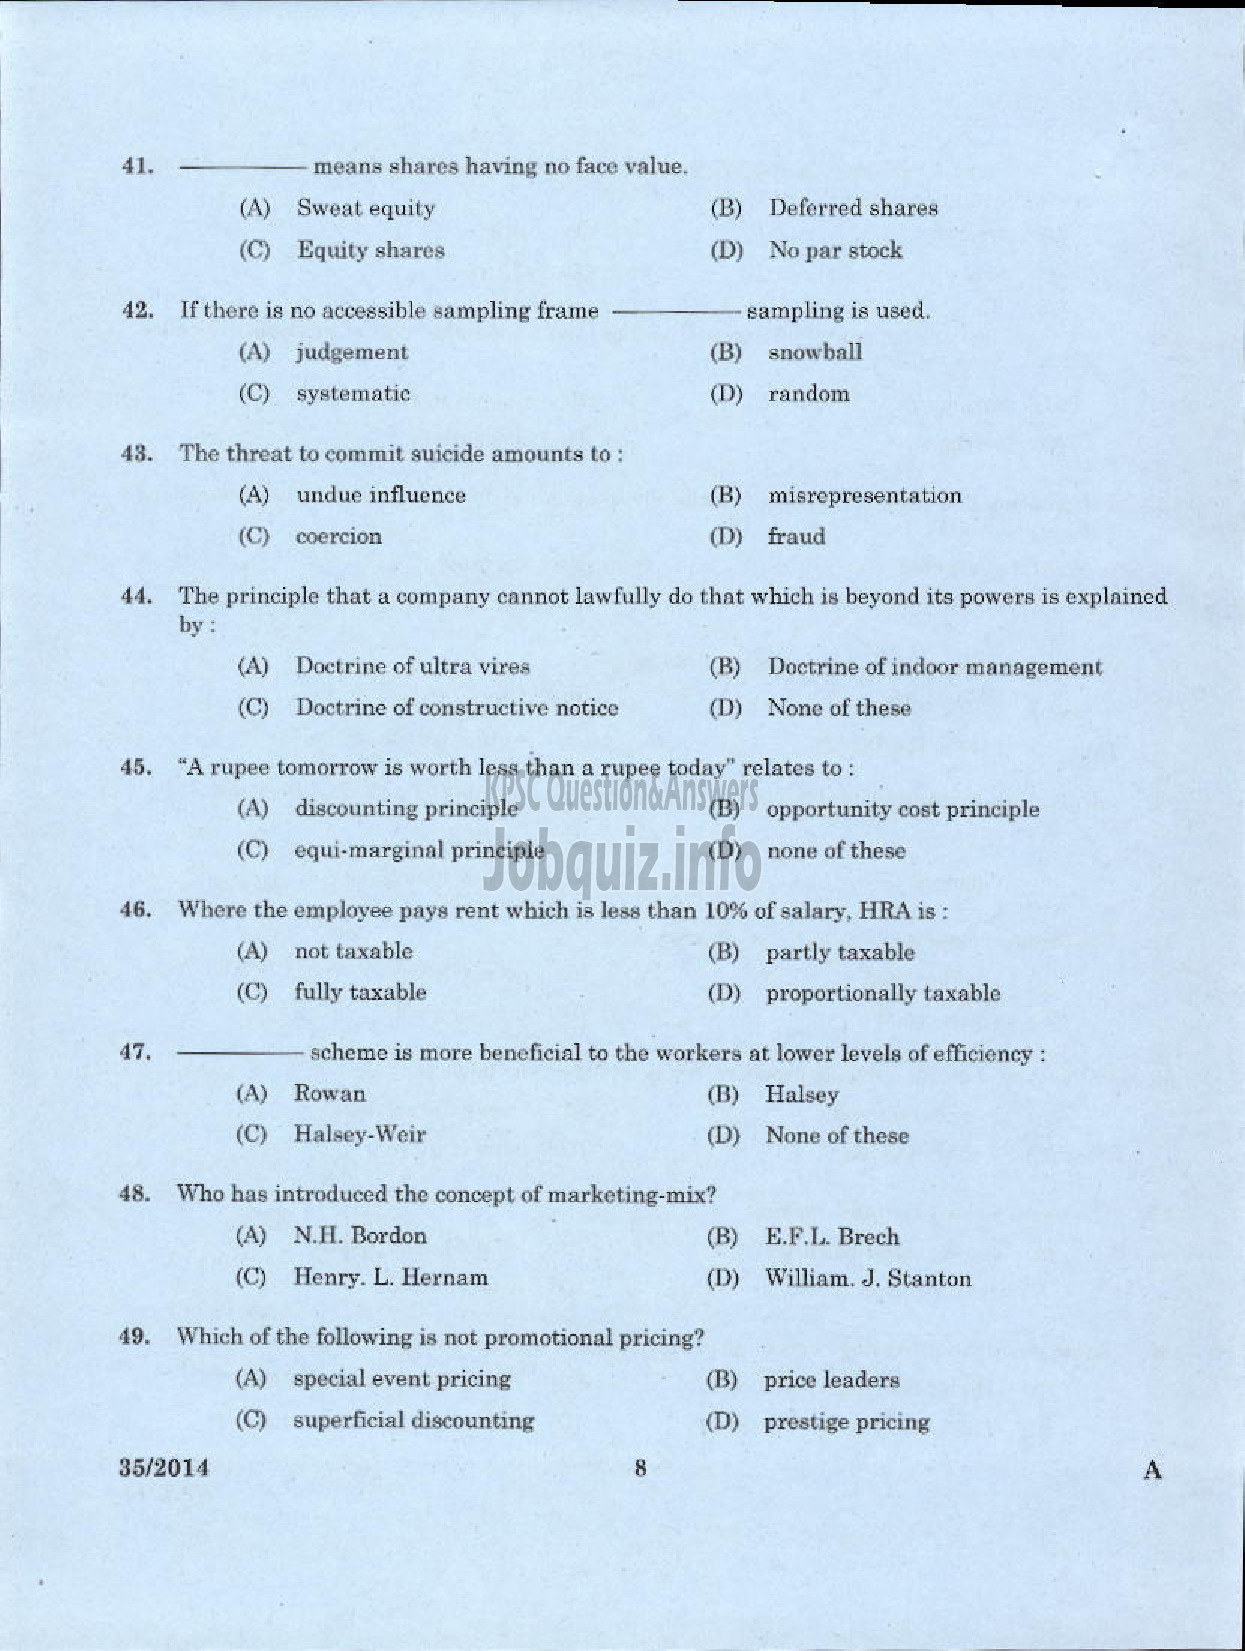 Kerala PSC Question Paper - JUNIOR ASSISTANT ACCOUNTS SR FOR ST ONLY TRAVANCORE COCHIN CHEMICALS LIMITED-6